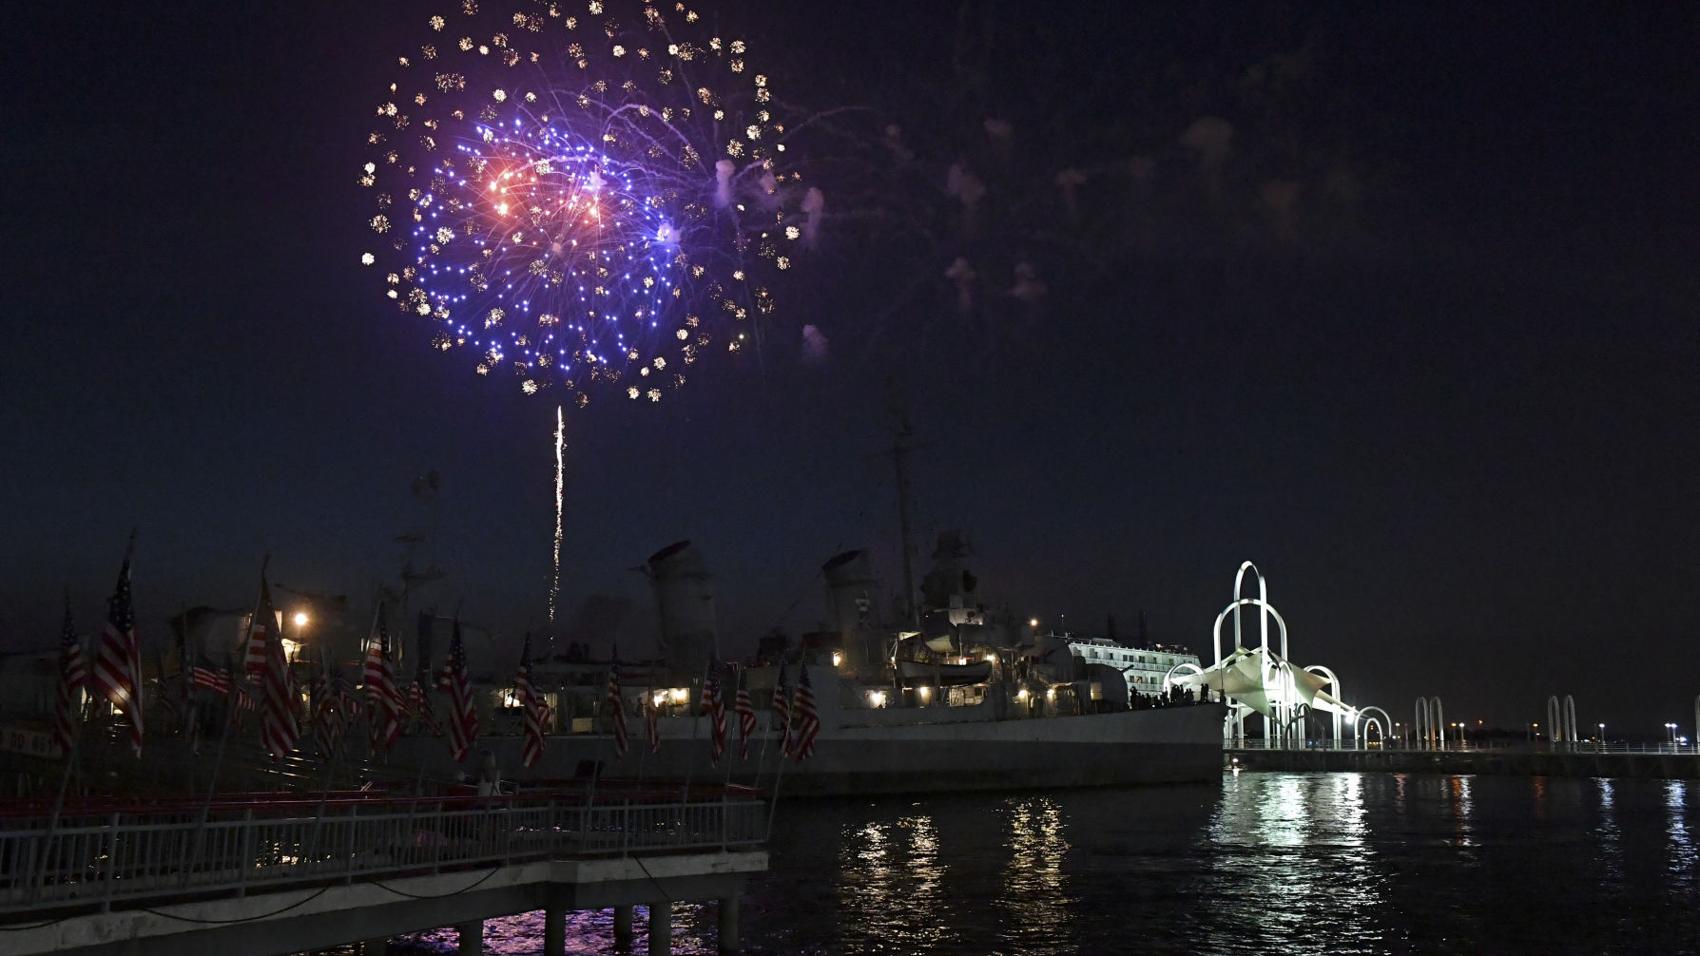 Photos: Fireworks, music and more 4th of July celebrations in downtown Baton Rouge